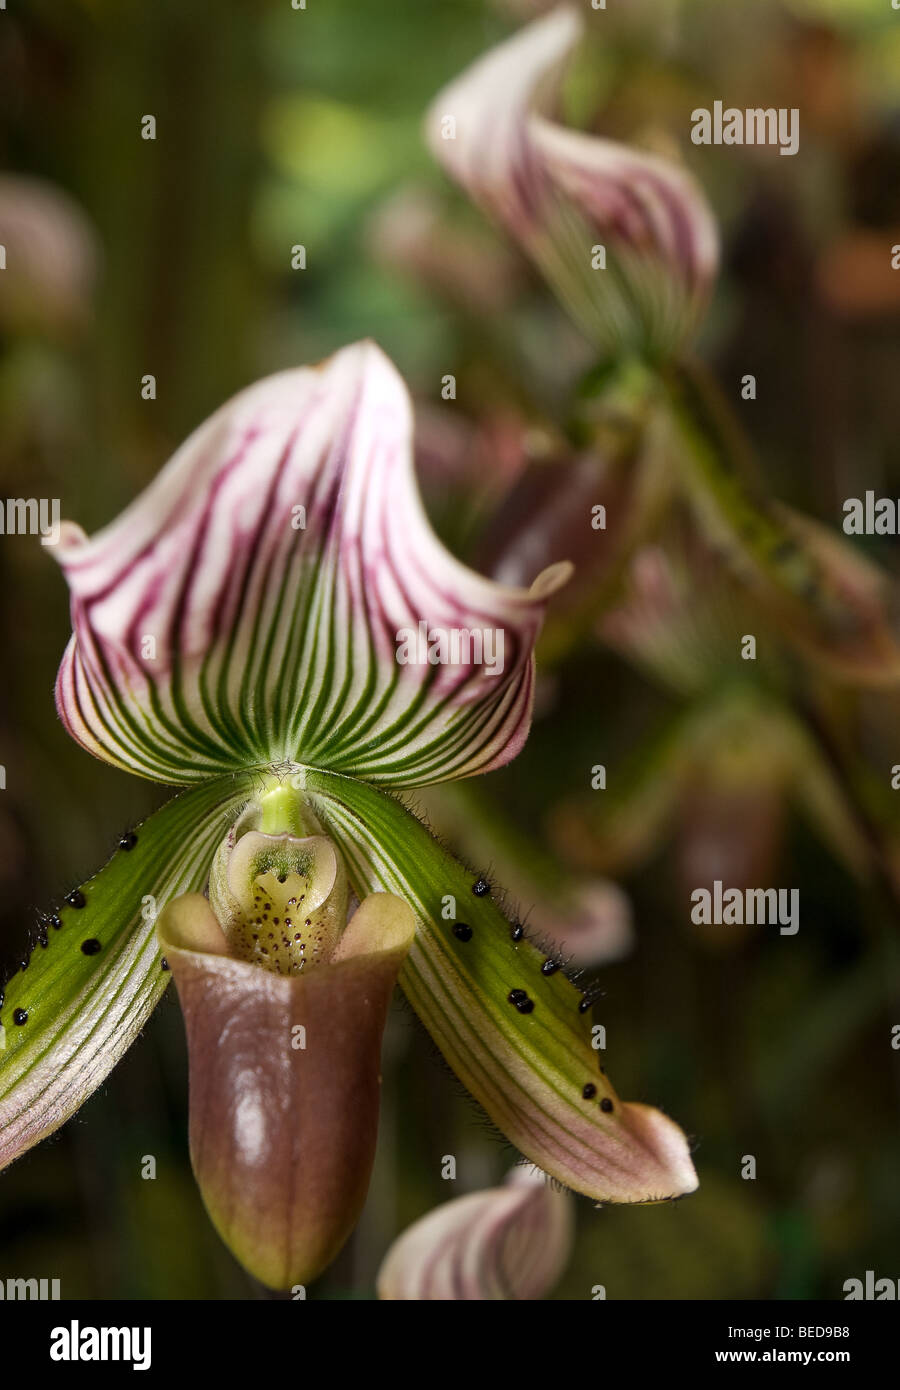 Paphiopedilum Orchid, lady slippers main in left foreground, with second flower behind Stock Photo